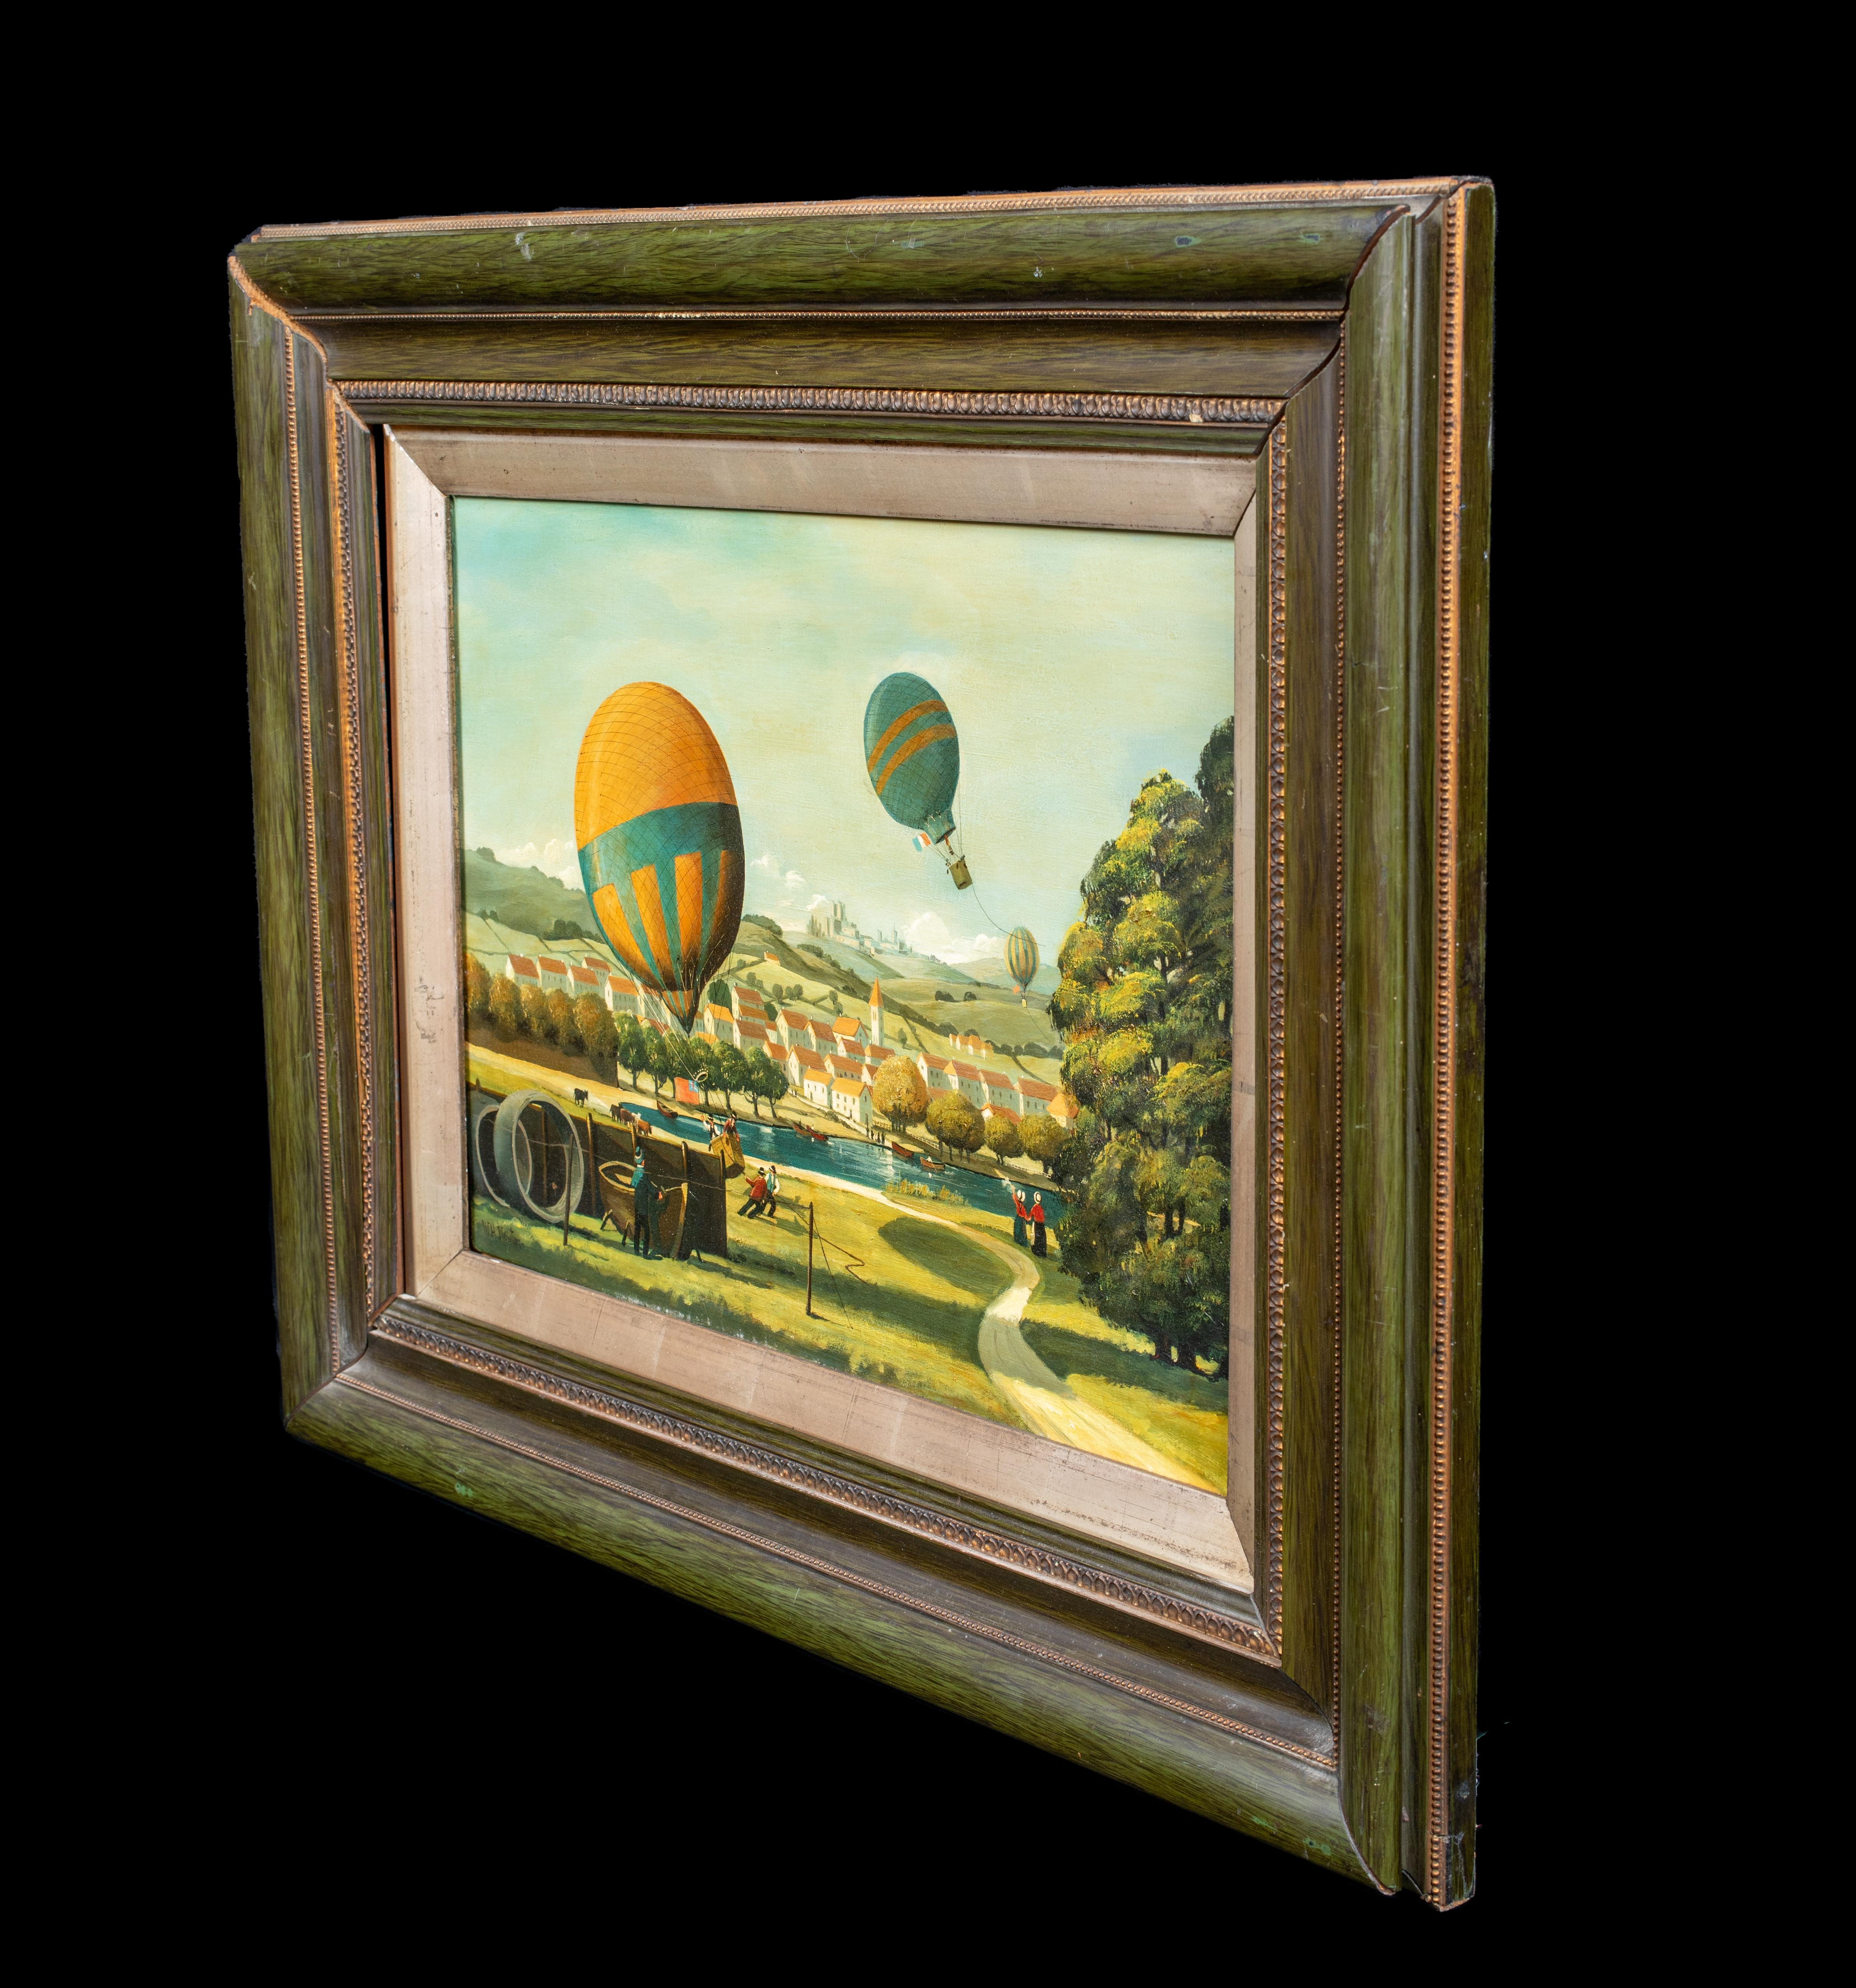 Hot Air Balloon Race Landscape, circa 1900  English School - signed W H NEWTON For Sale 2